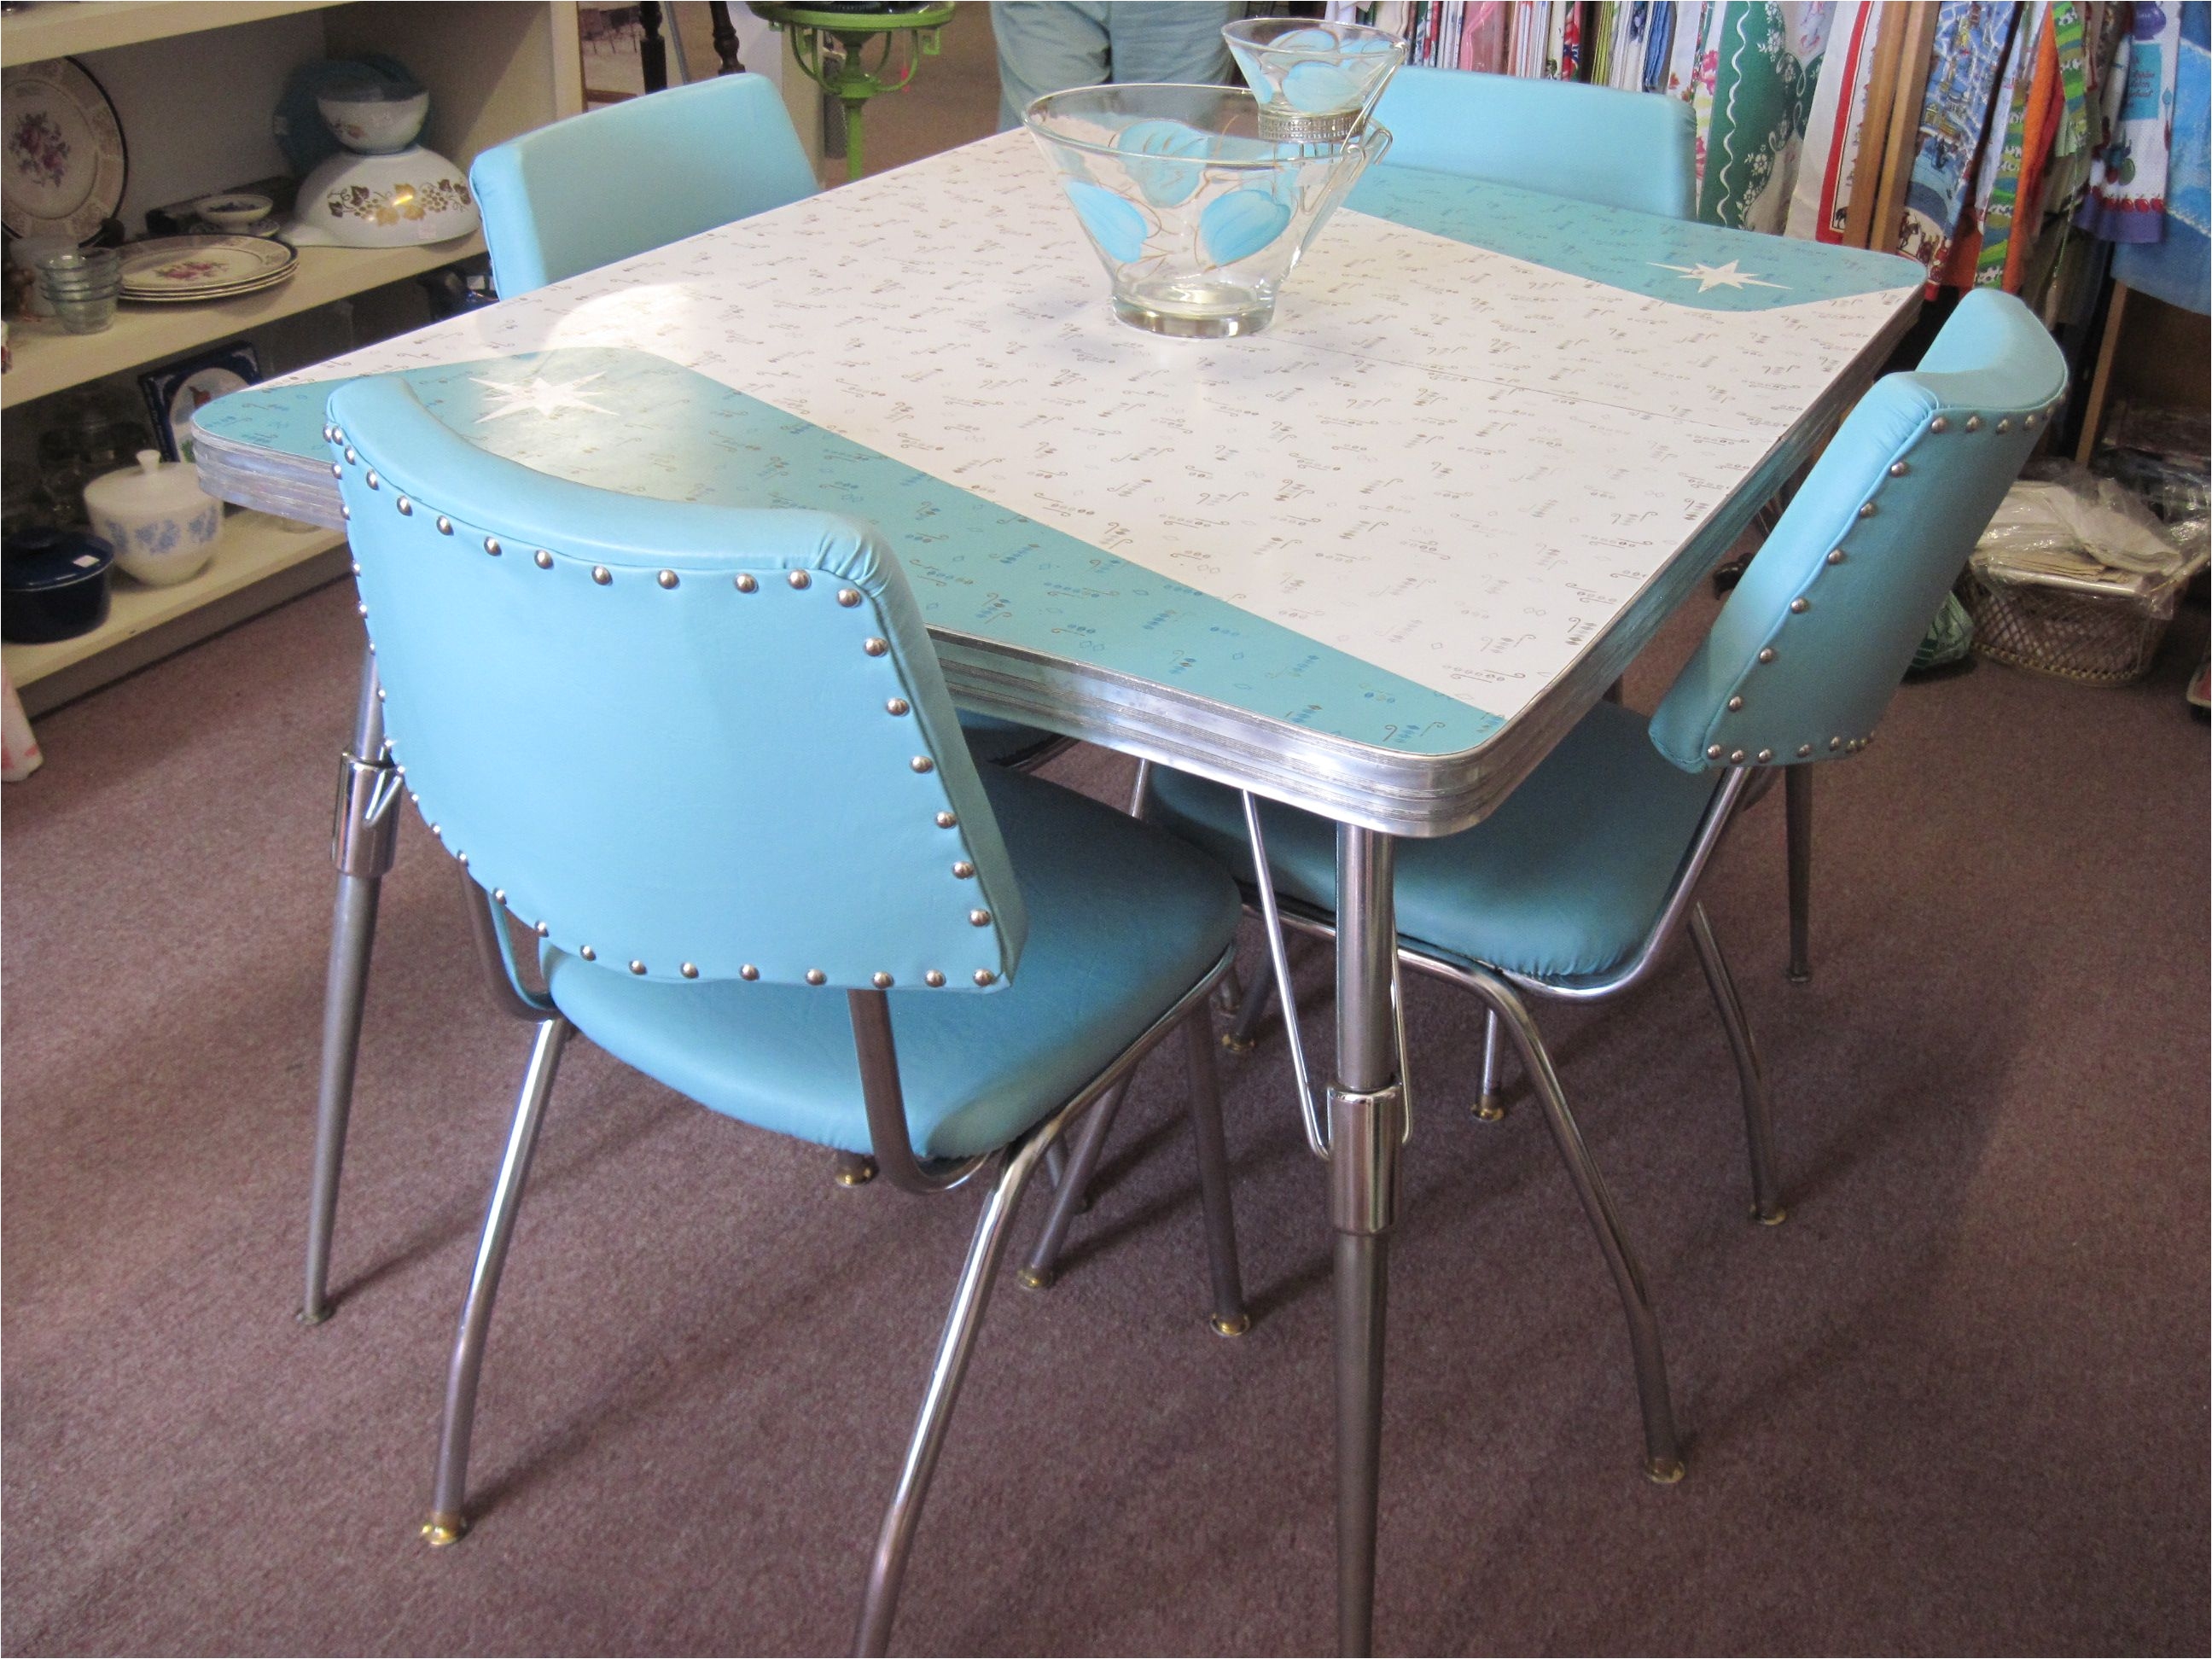 Retro formica Table and Chairs for Sale Impressive Retro Kitchen Tables with We Found This Great 1950 S